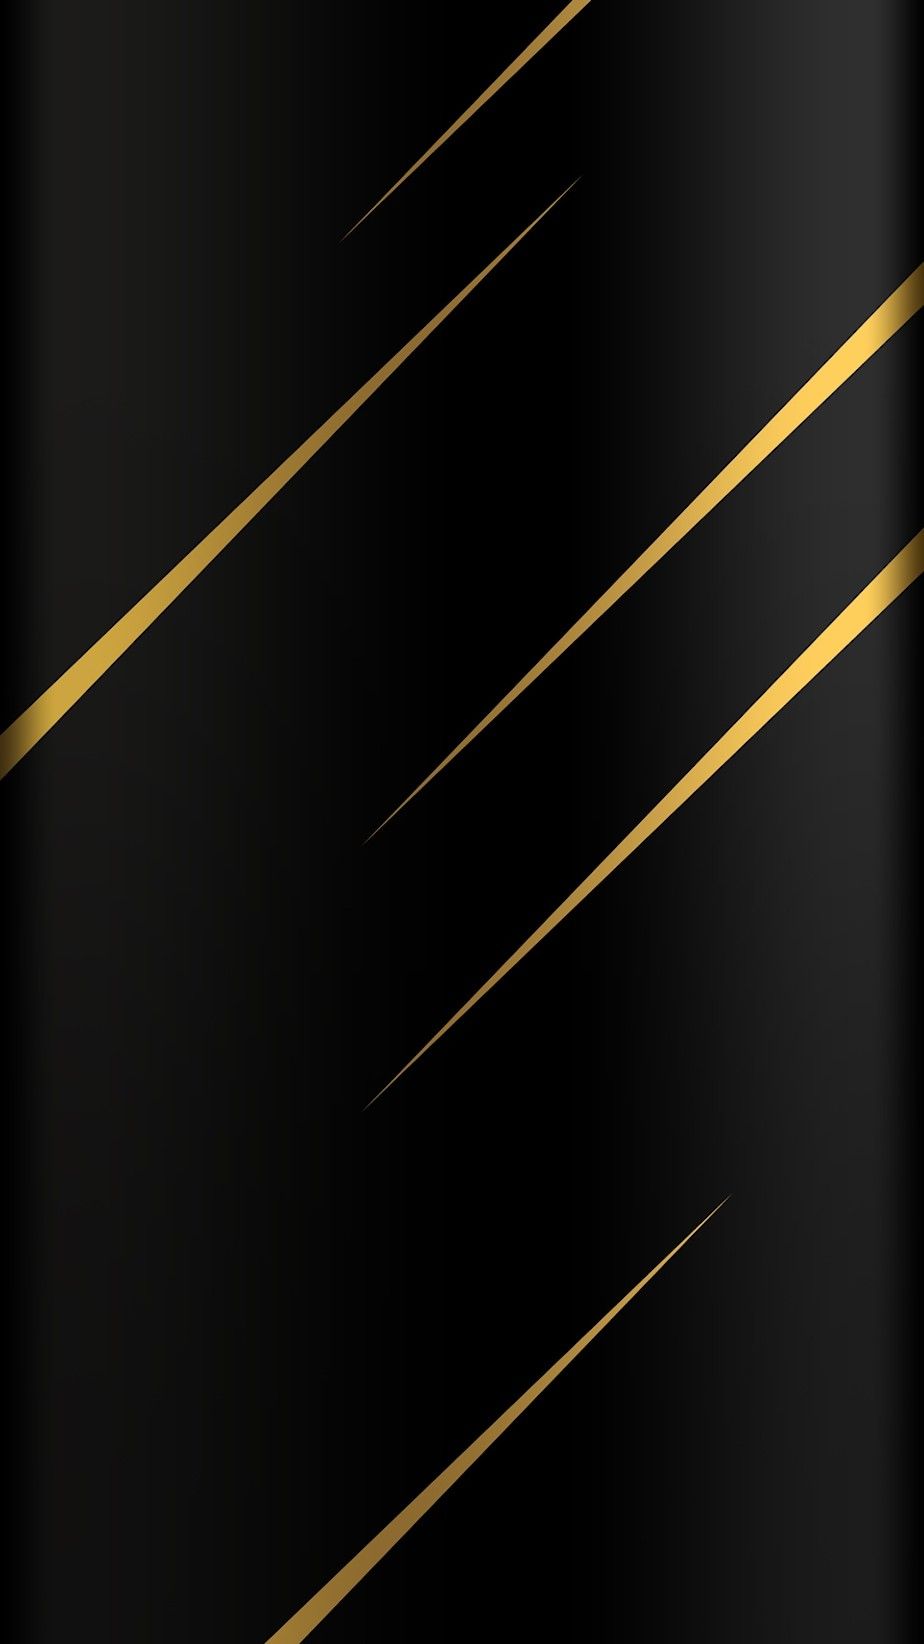 1,600+ Black Gold Abstract Background Stock Videos and Royalty-Free Footage  - iStock